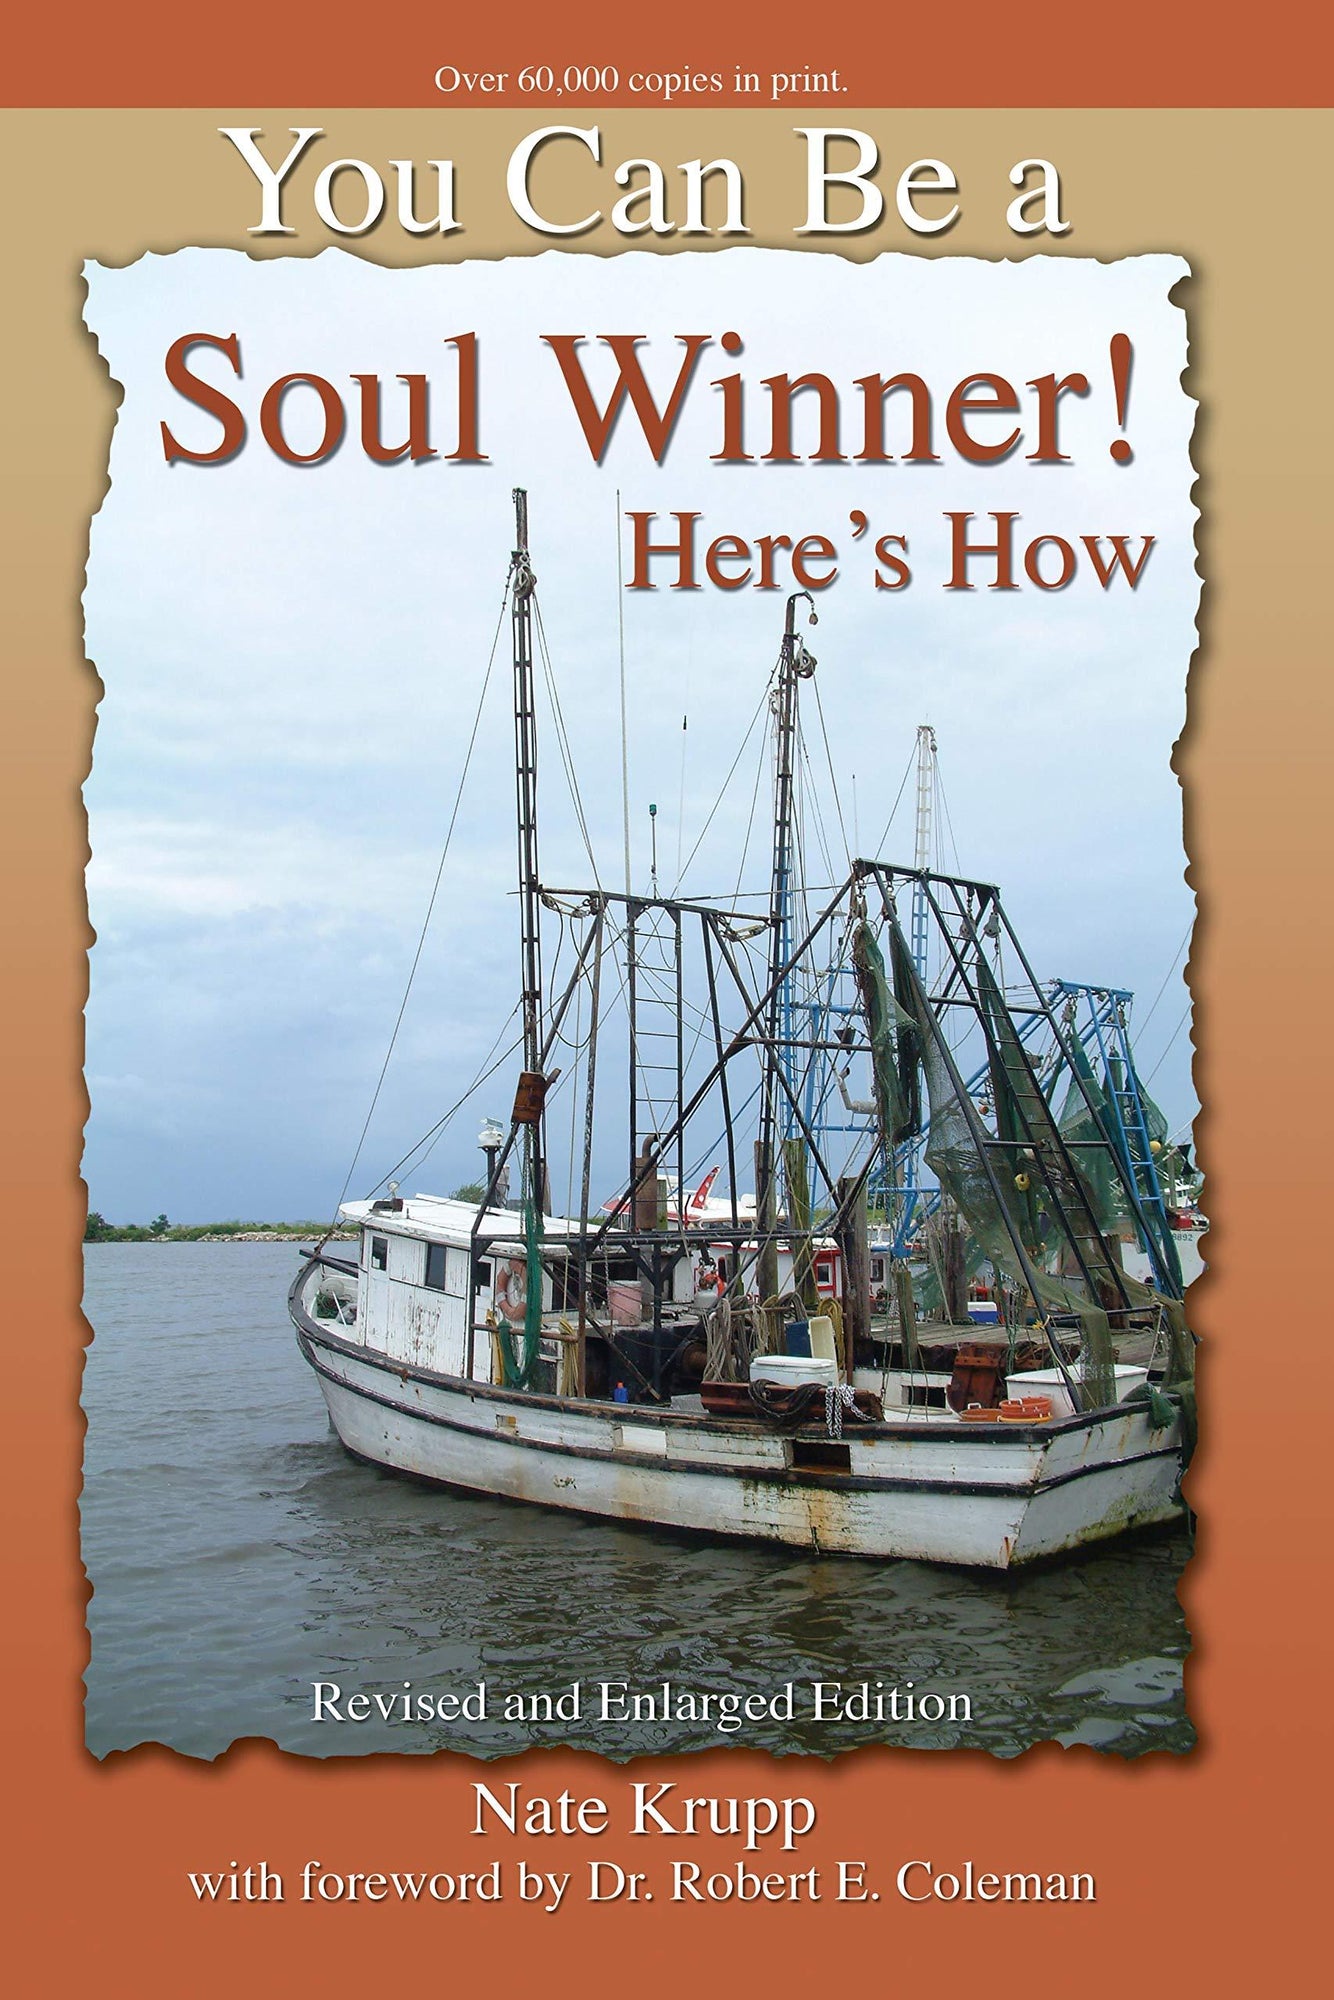 You Can Be a Soul Winner!: Here's How Paperback – November 1, 2018